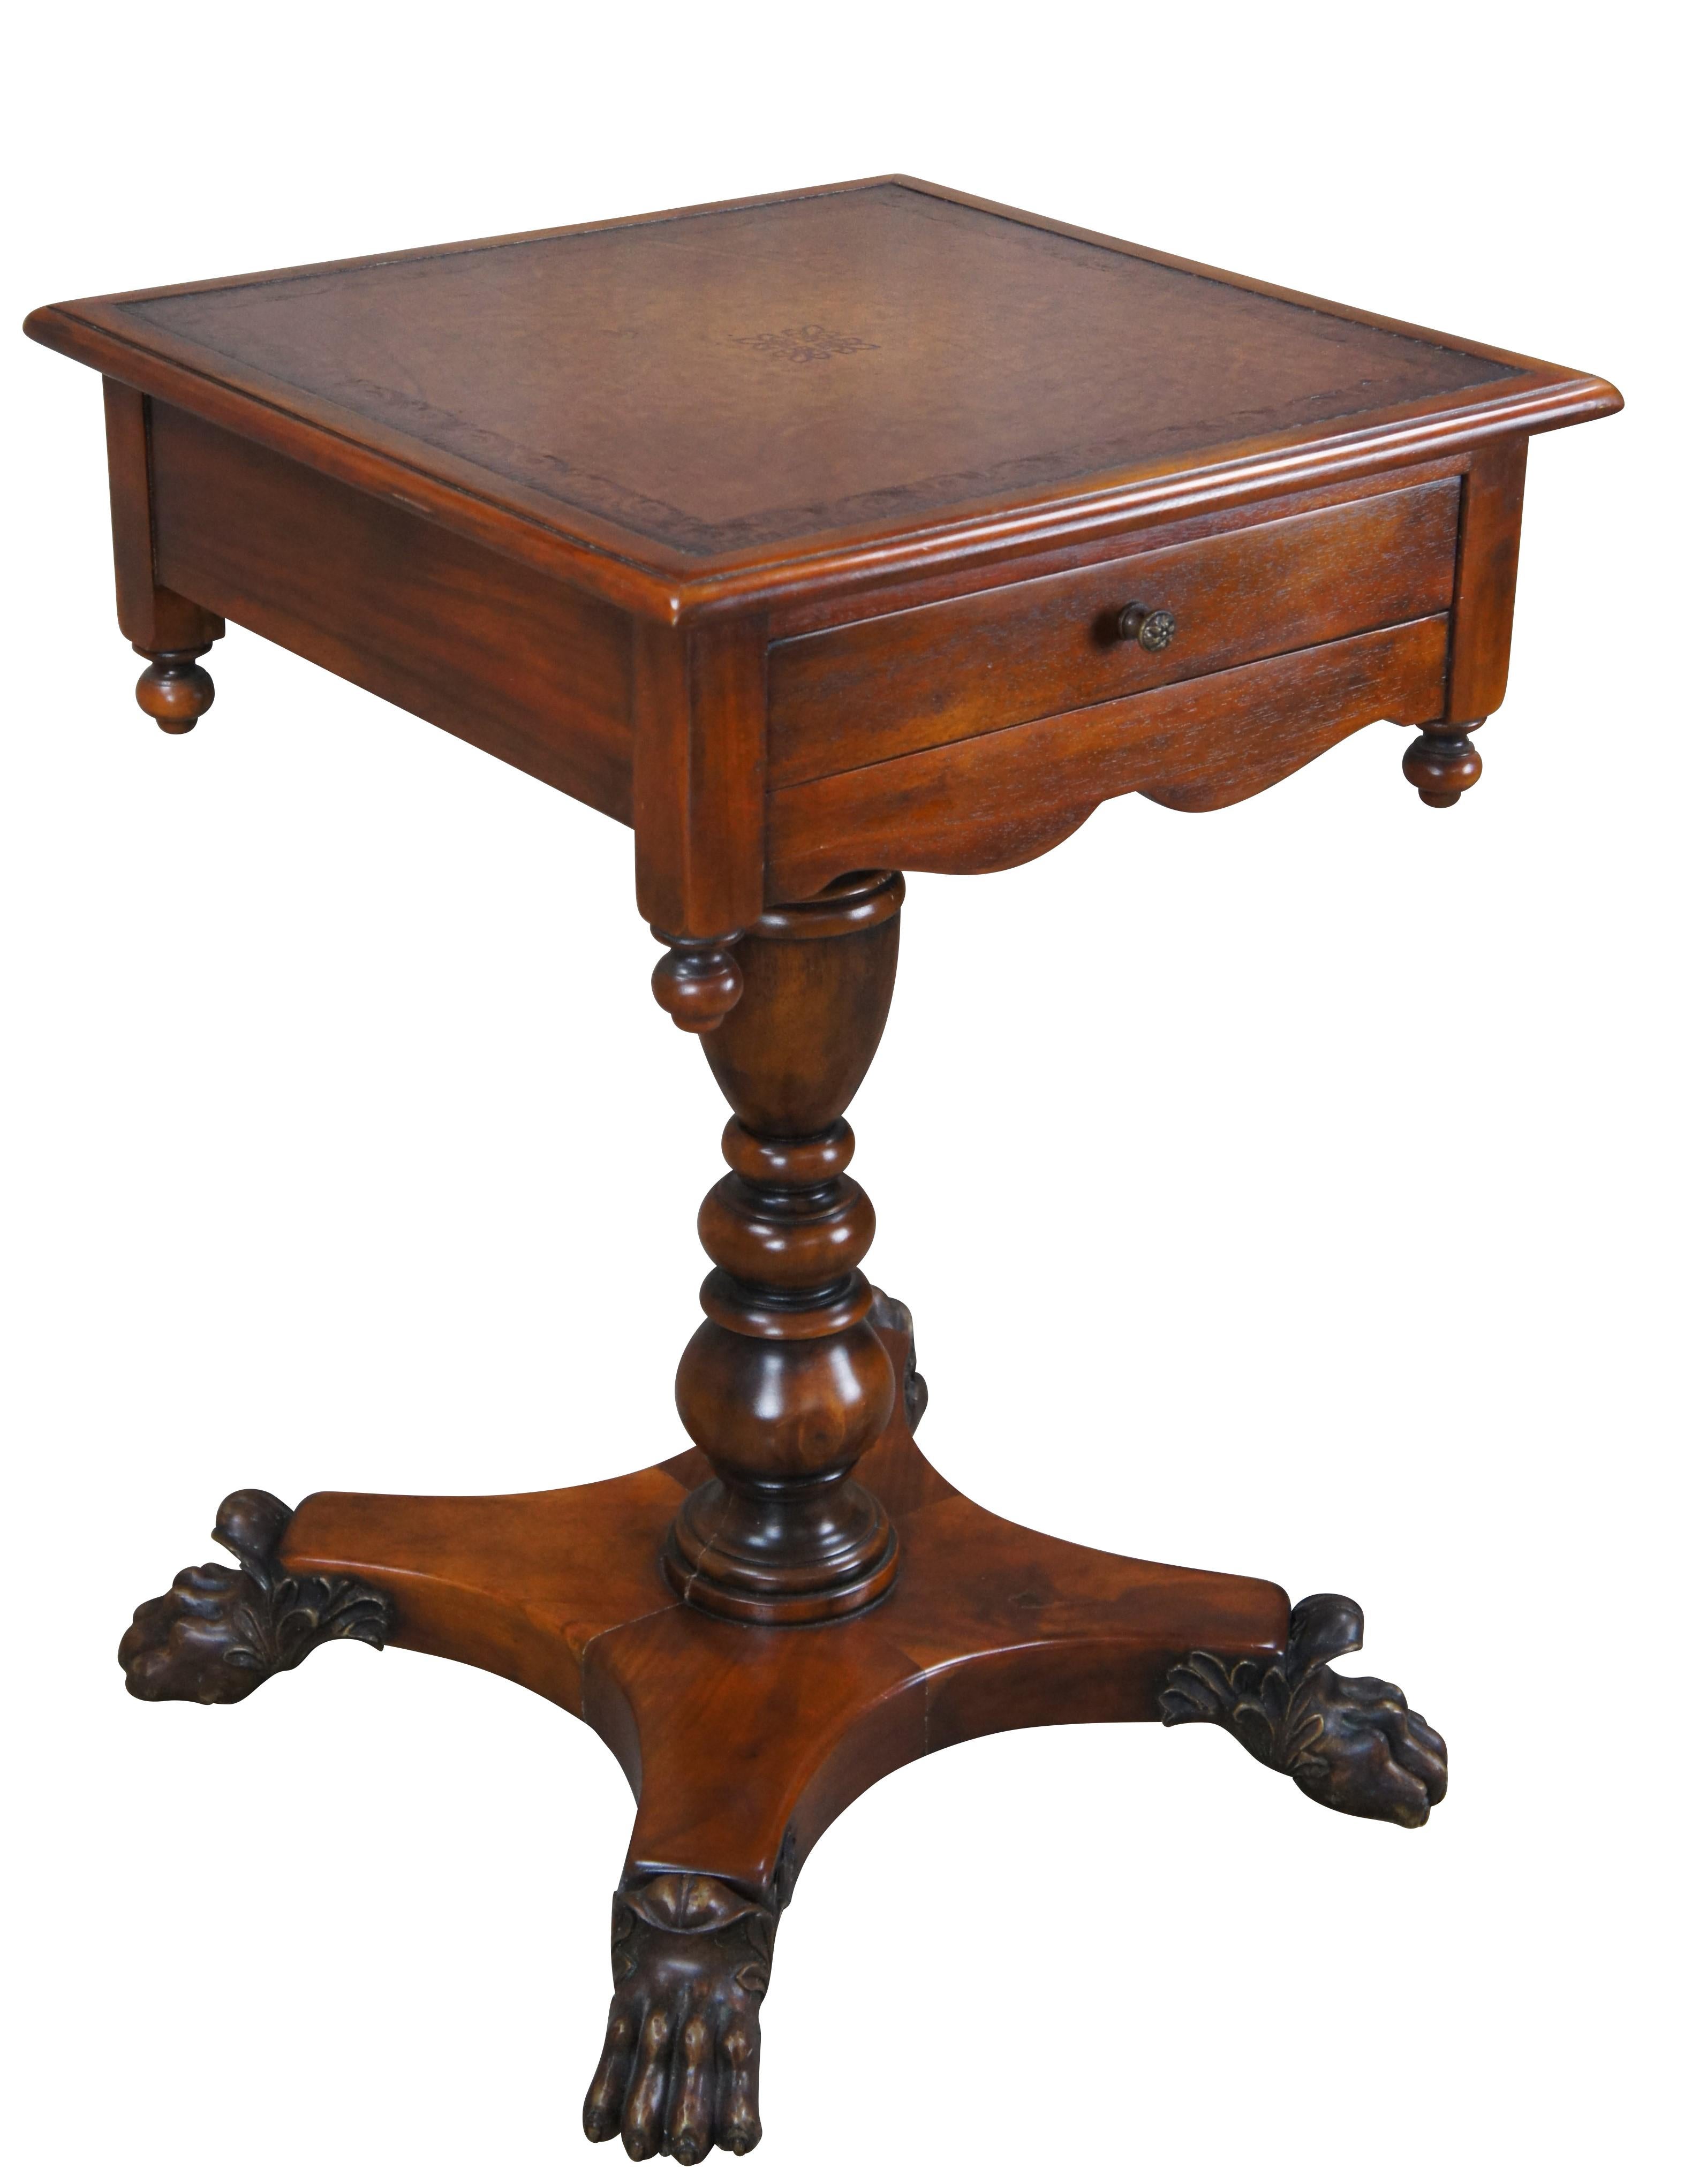 A stately American Empire style side table by Theodore Alexander, Circa late 20th century. This table is styled after a period example from the 1830s. Features a square form Made from mahogany with a topped leather top over frieze with dovetailed